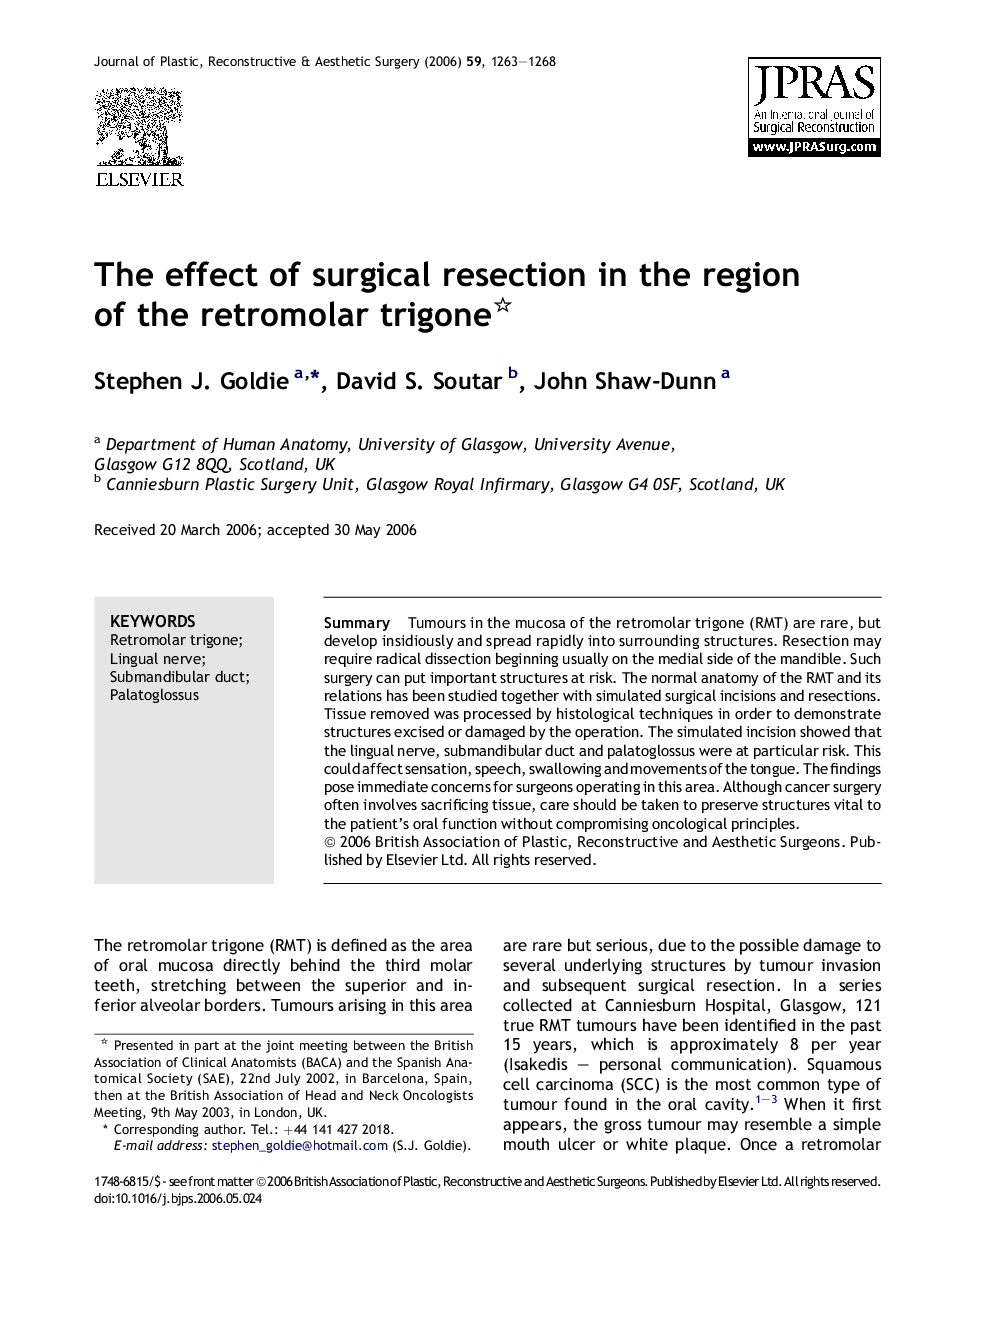 The effect of surgical resection in the region of the retromolar trigone 